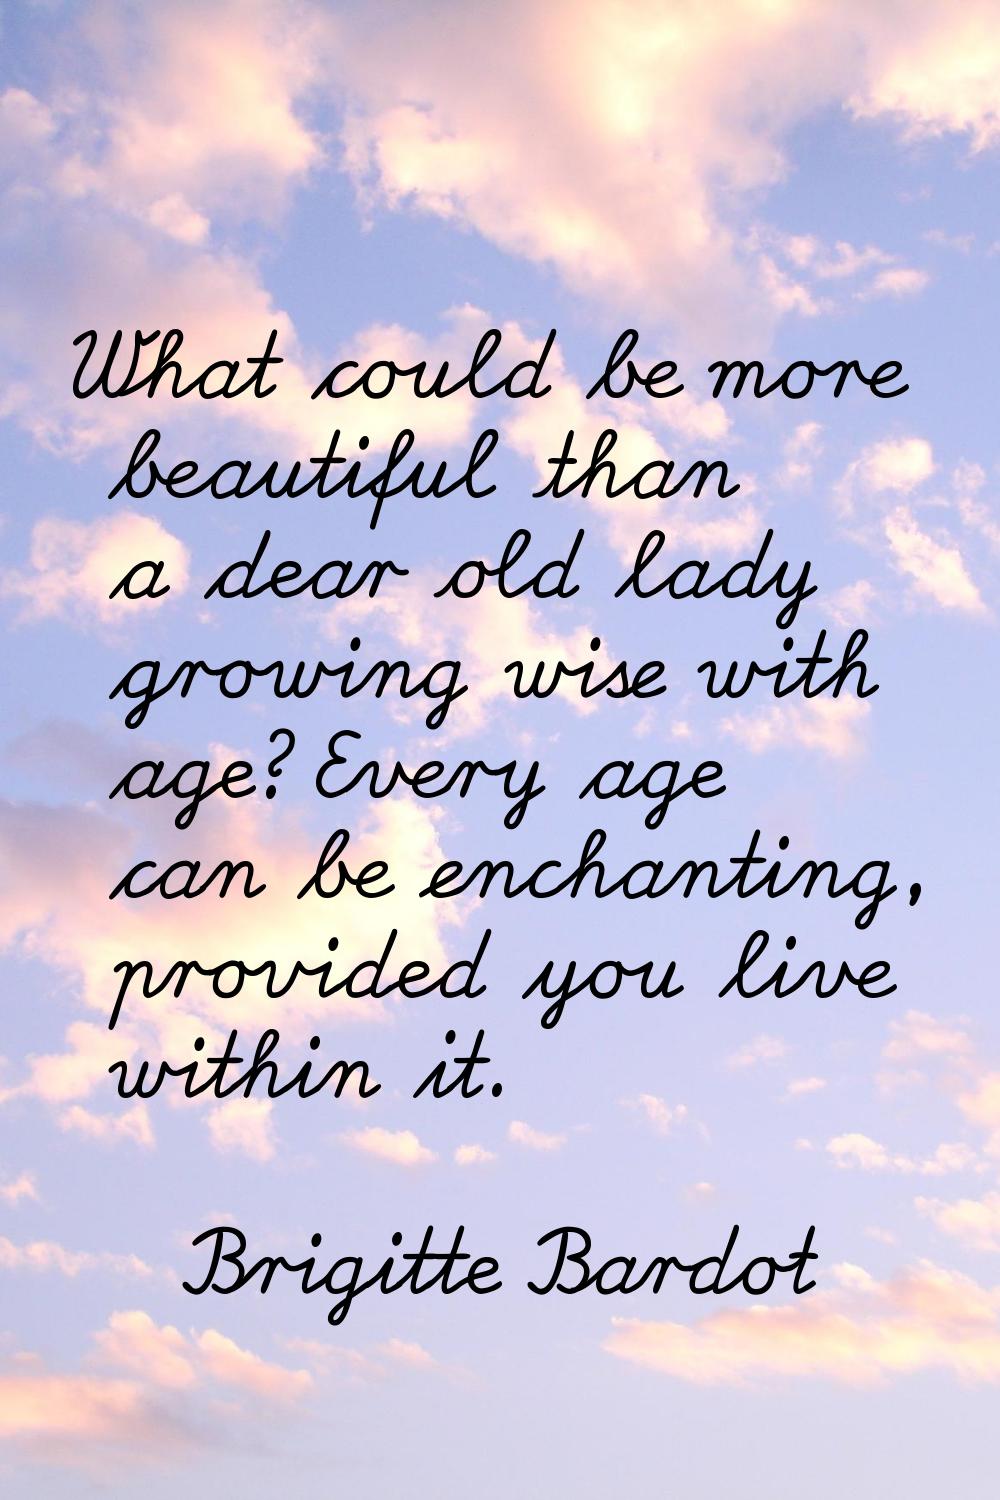 What could be more beautiful than a dear old lady growing wise with age? Every age can be enchantin